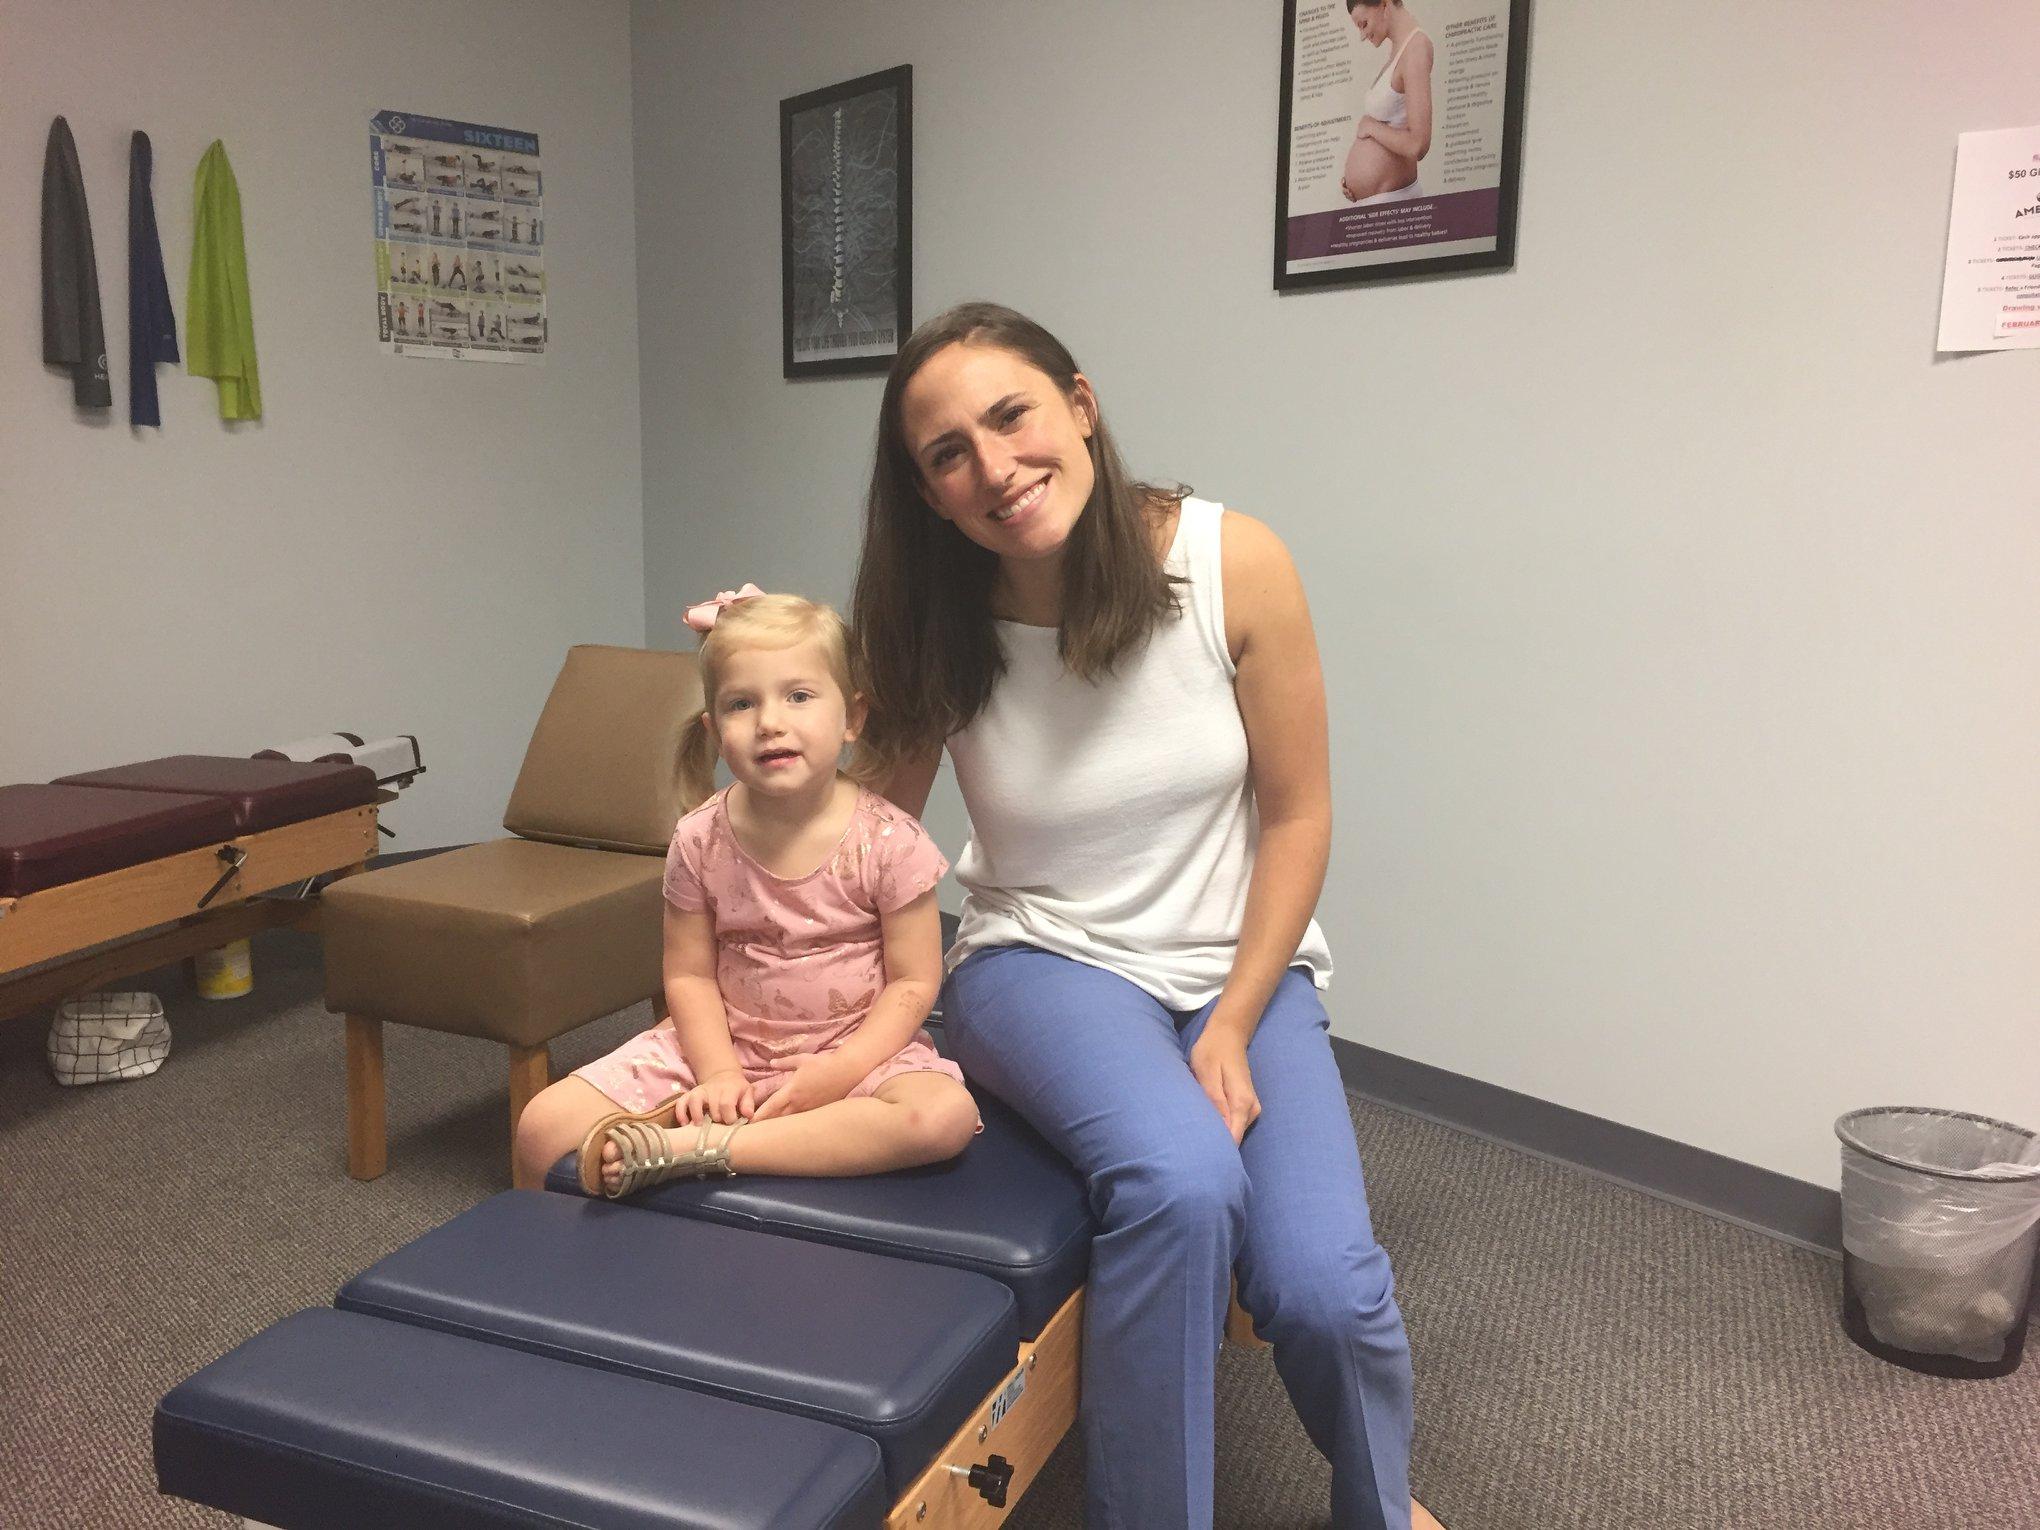 Call These Houston, TX Family Chiropractors For Child-Suited Treatment Options